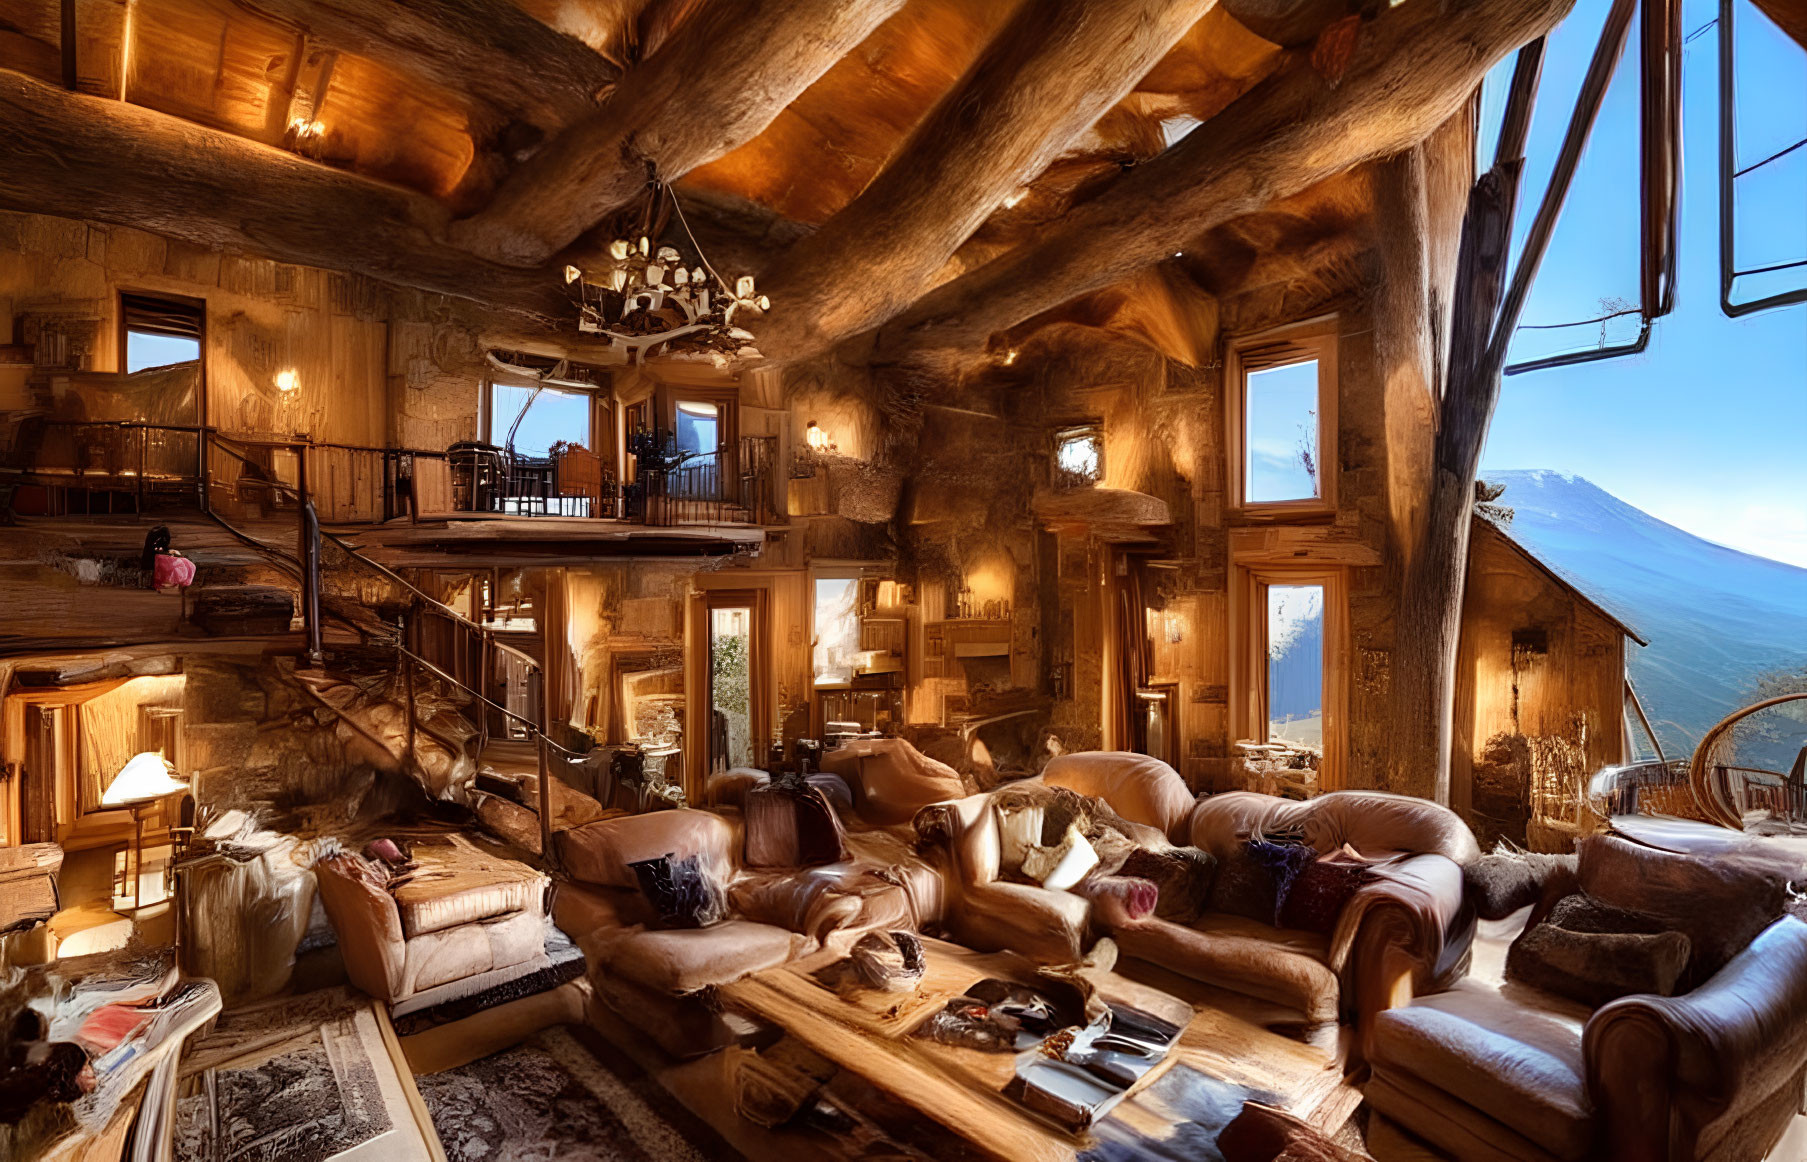 Rustic cabin interior with wooden beams, plush sofas, chandelier, staircase, and scenic view